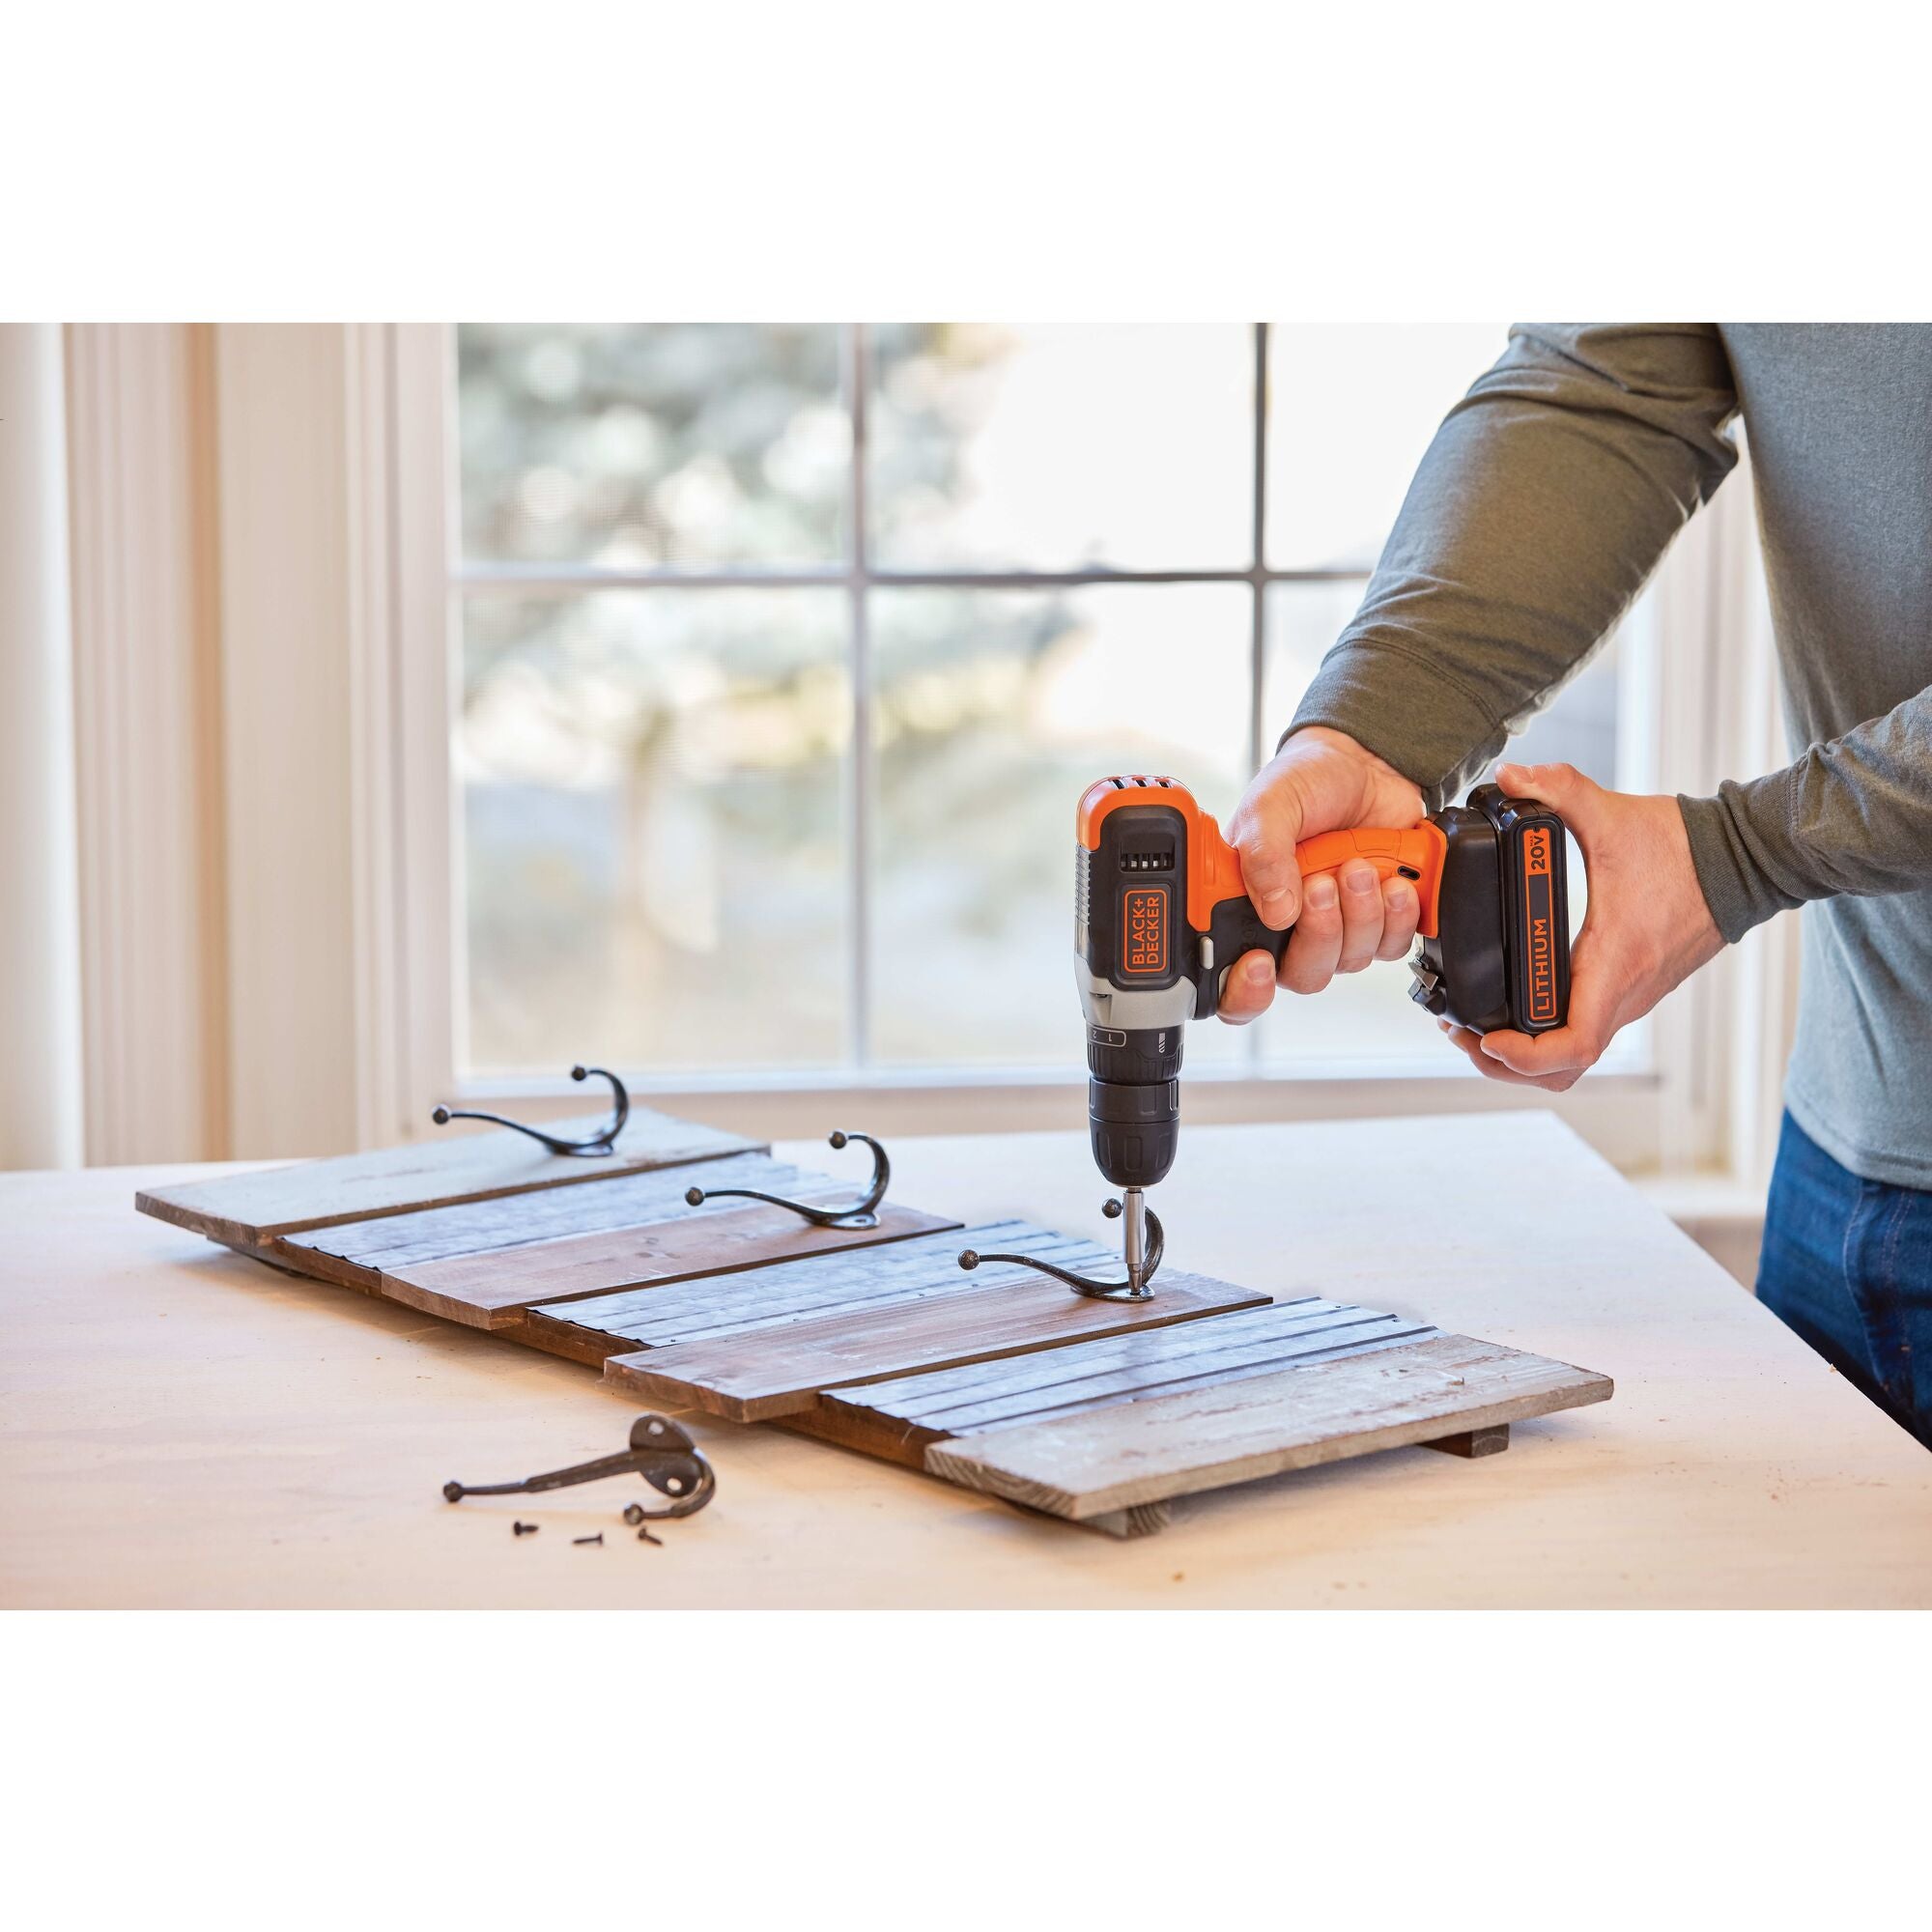 20V MAX* Cordless Drill With 28-Piece Home Project Kit | BLACK+DECKER